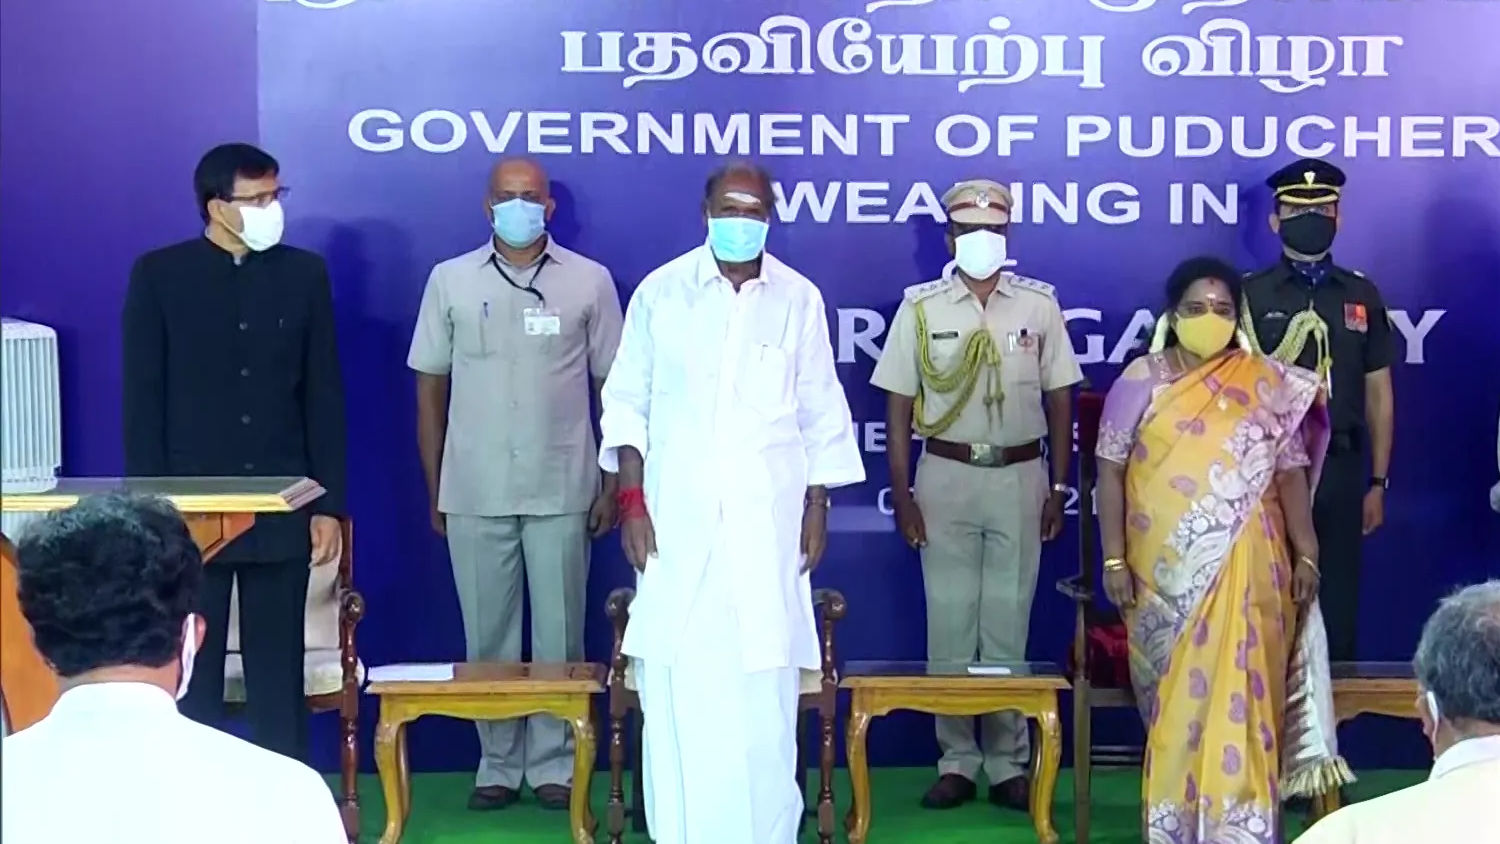 AINRC chief N Rangasamy takes over as Puducherry Chief Minister